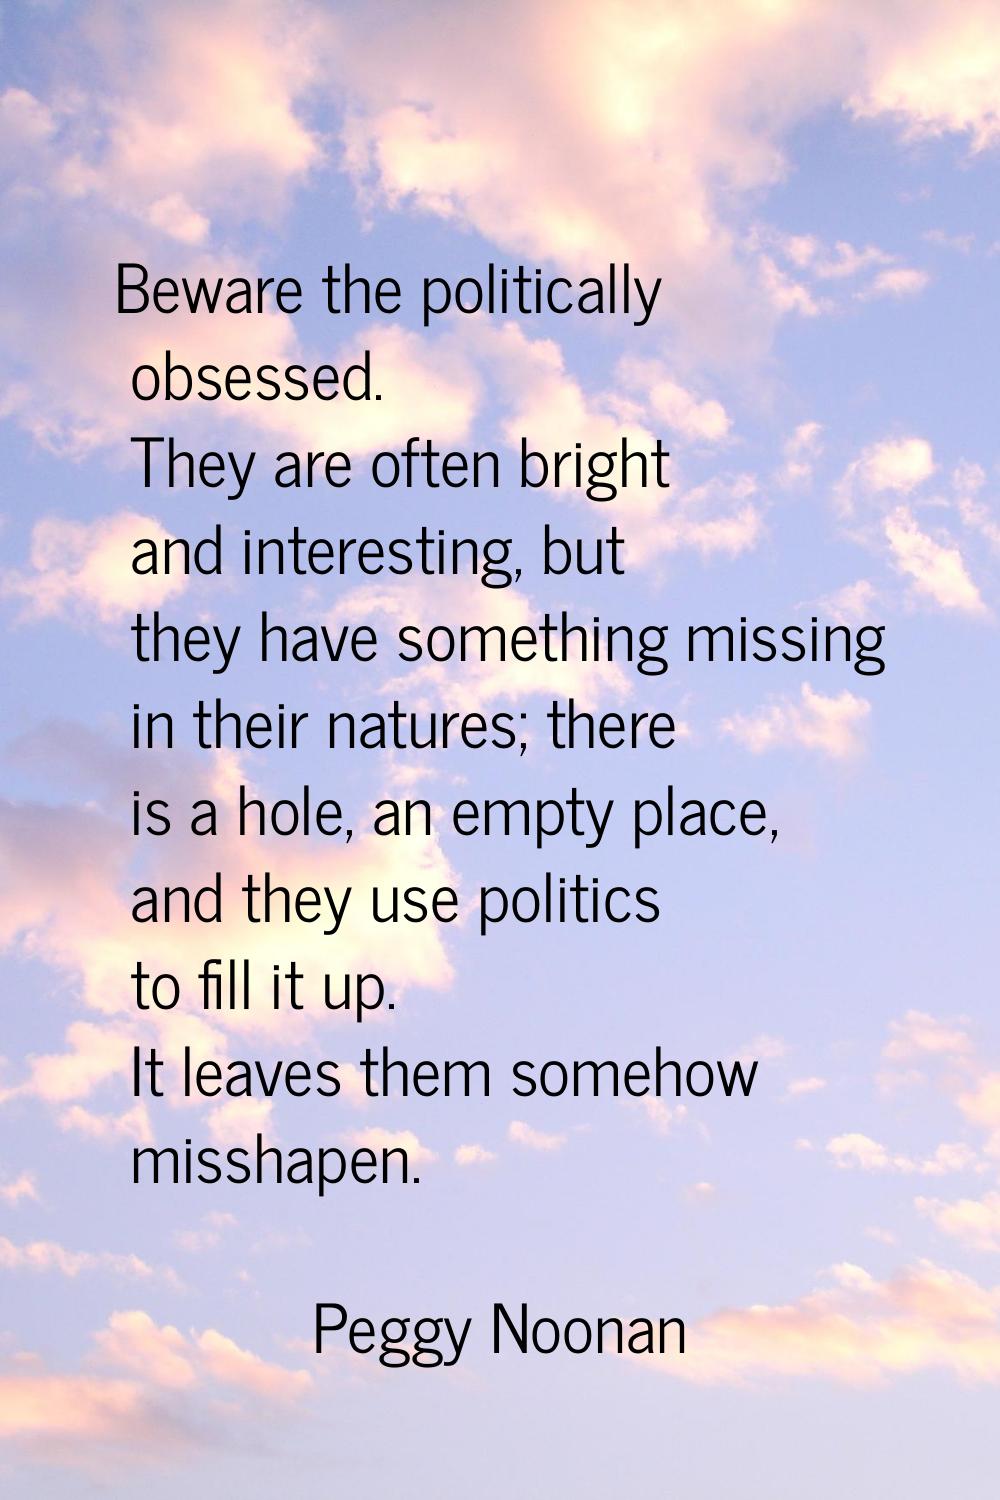 Beware the politically obsessed. They are often bright and interesting, but they have something mis